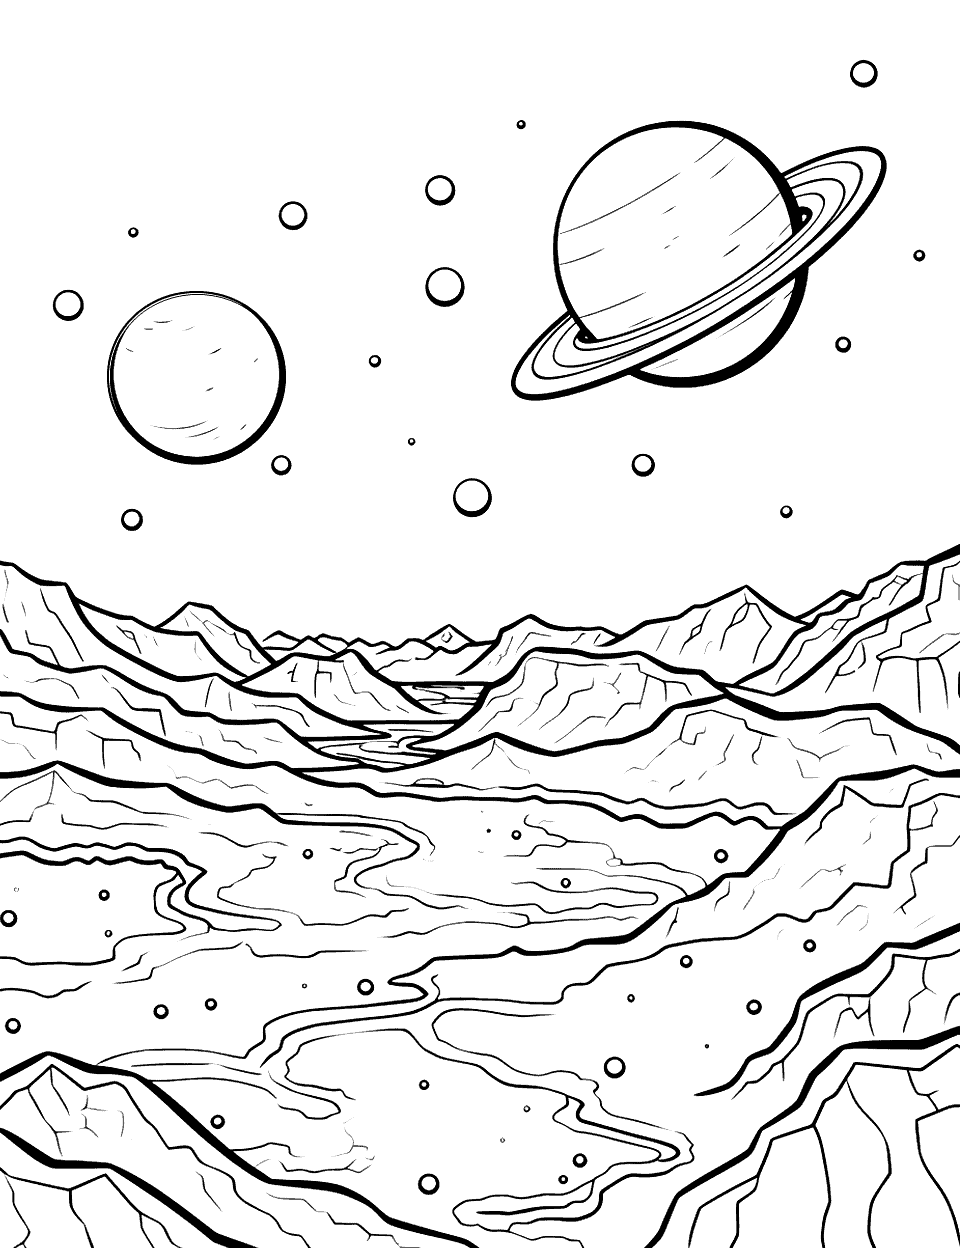 Pluto's Icy Terrain Solar System Coloring Page - Pluto shown with its icy surface.